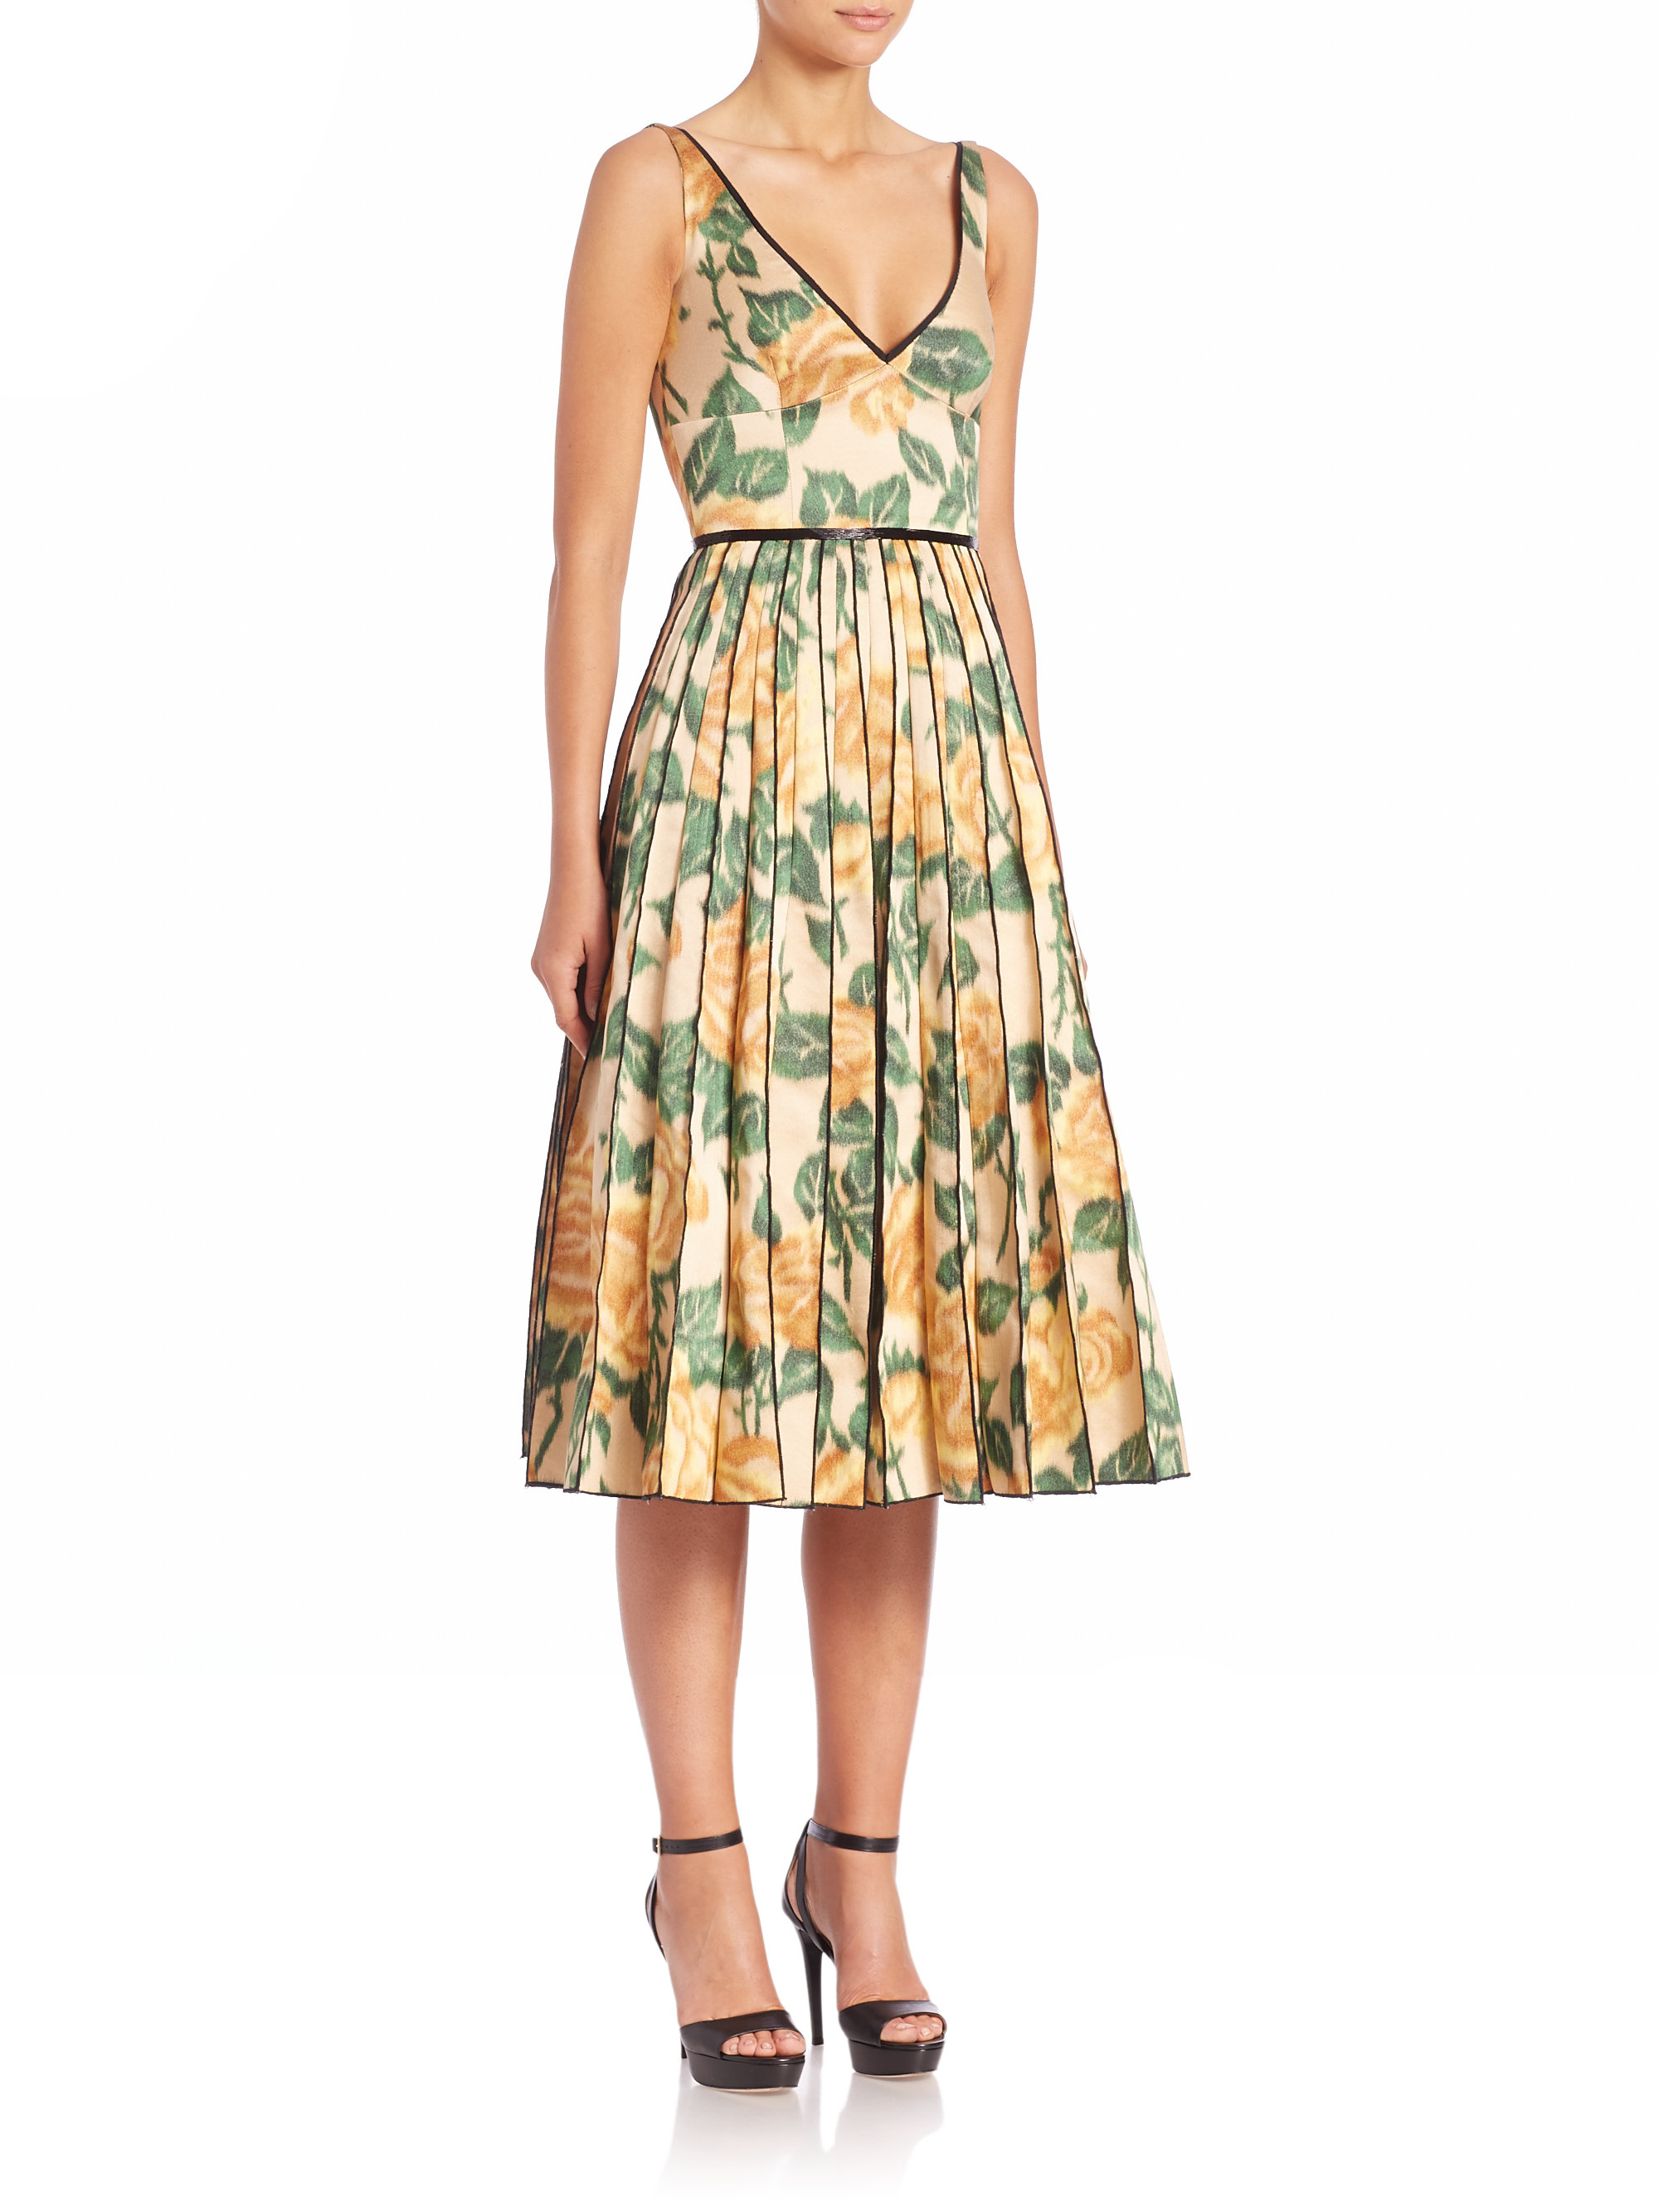 Lyst - Marc Jacobs Rose-print Silk Cocktail Dress in Yellow